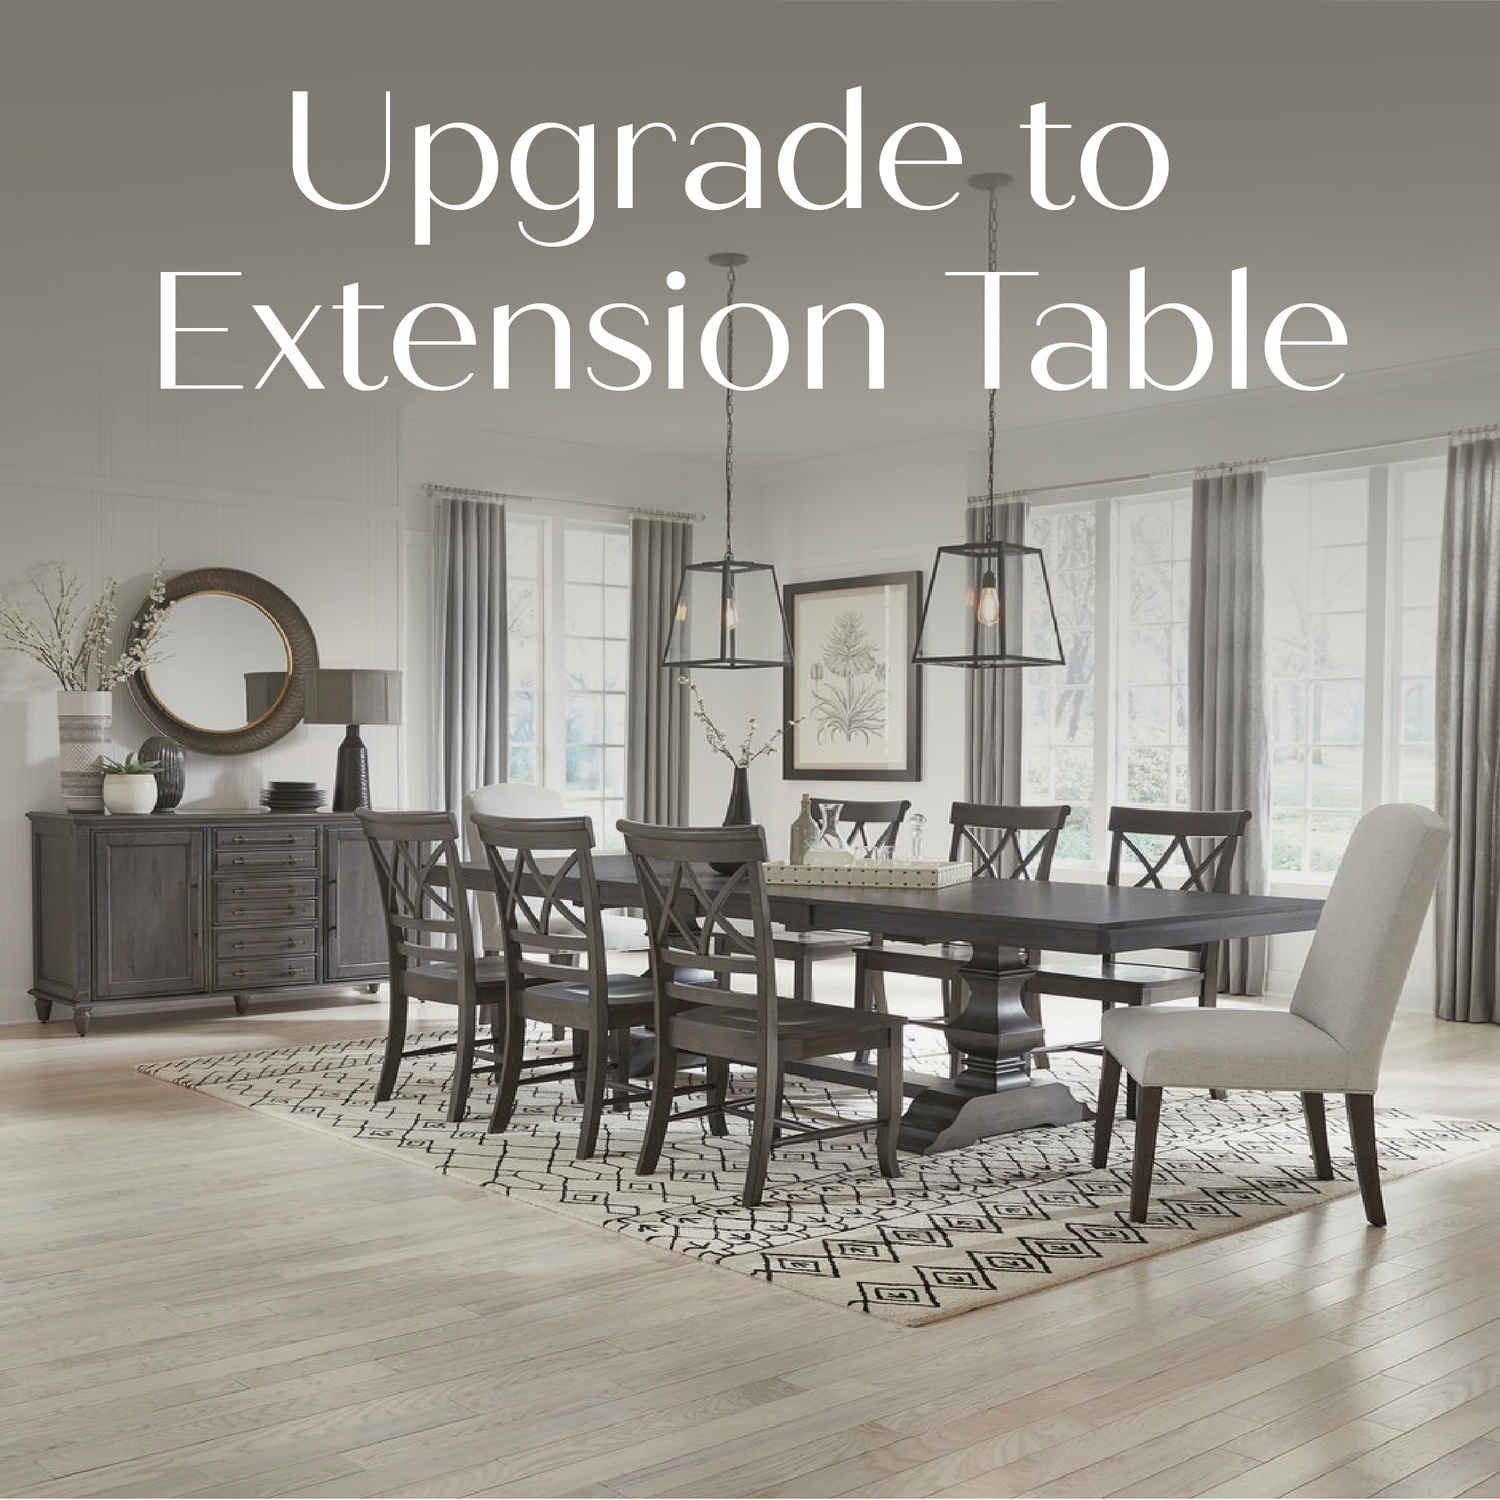 Upgrade to Extension Table